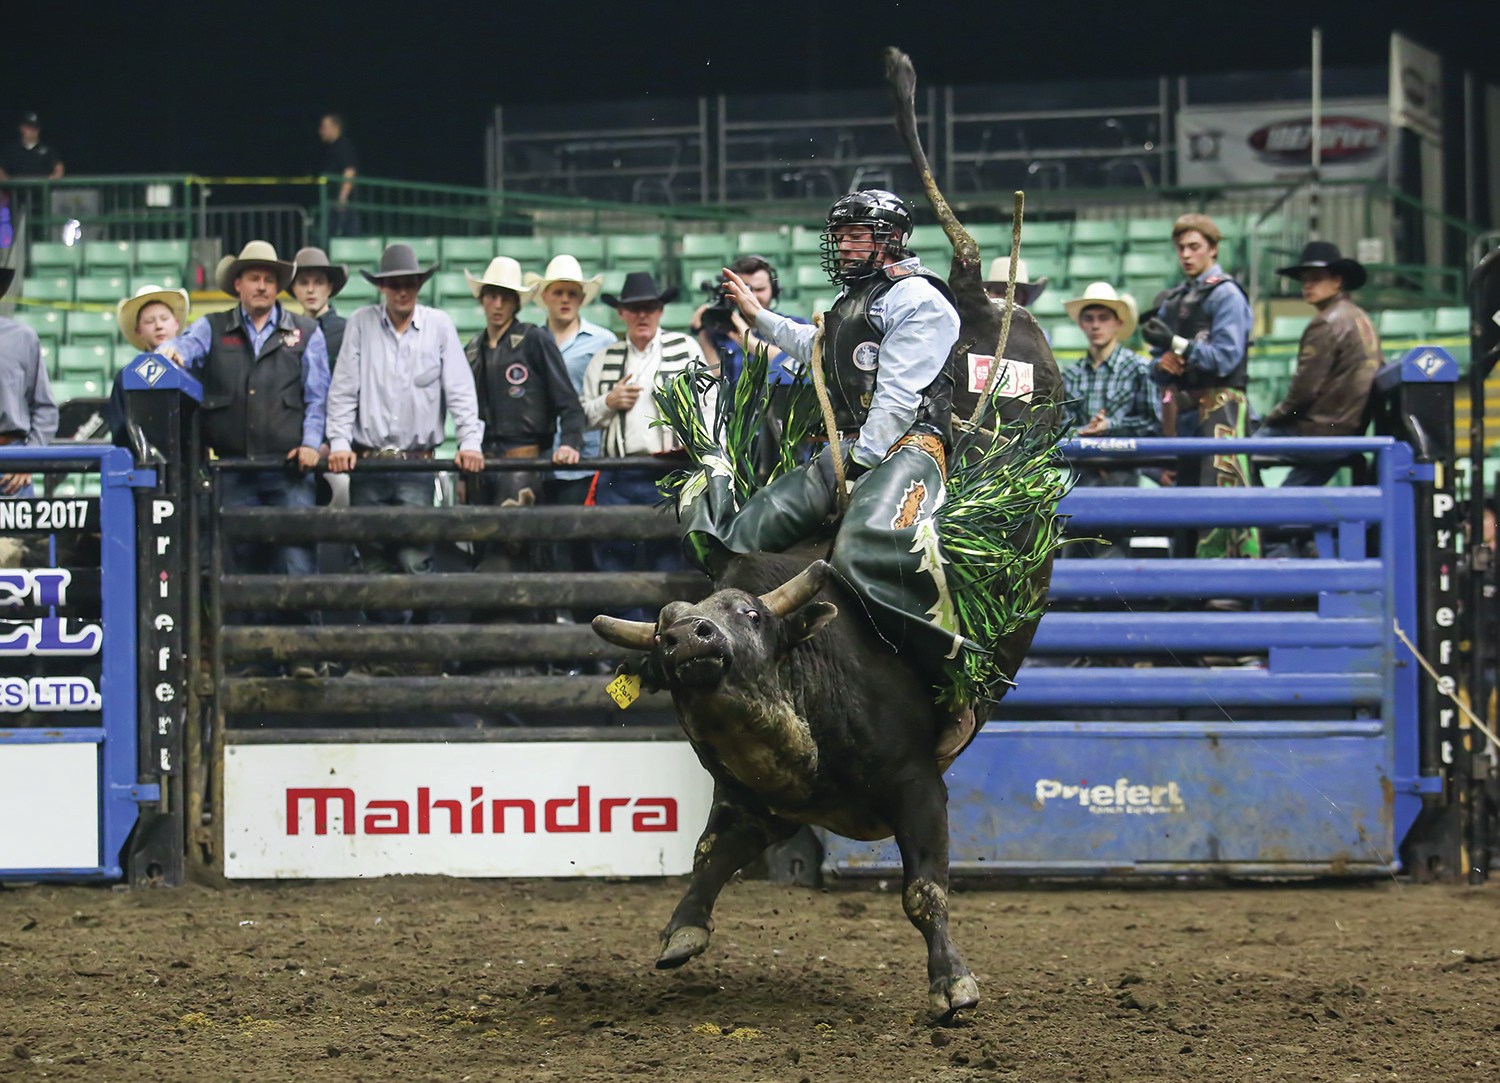 WILD RIDE - Calgary’s Jordan Hansen rode X over 6 Ranch’s Jesus & Bocephus for 88 points in the short-go to clinch the overall title during the Rebel Energy Services Xtreme Bulls Event at the ENMAX Centrium earlier this month.